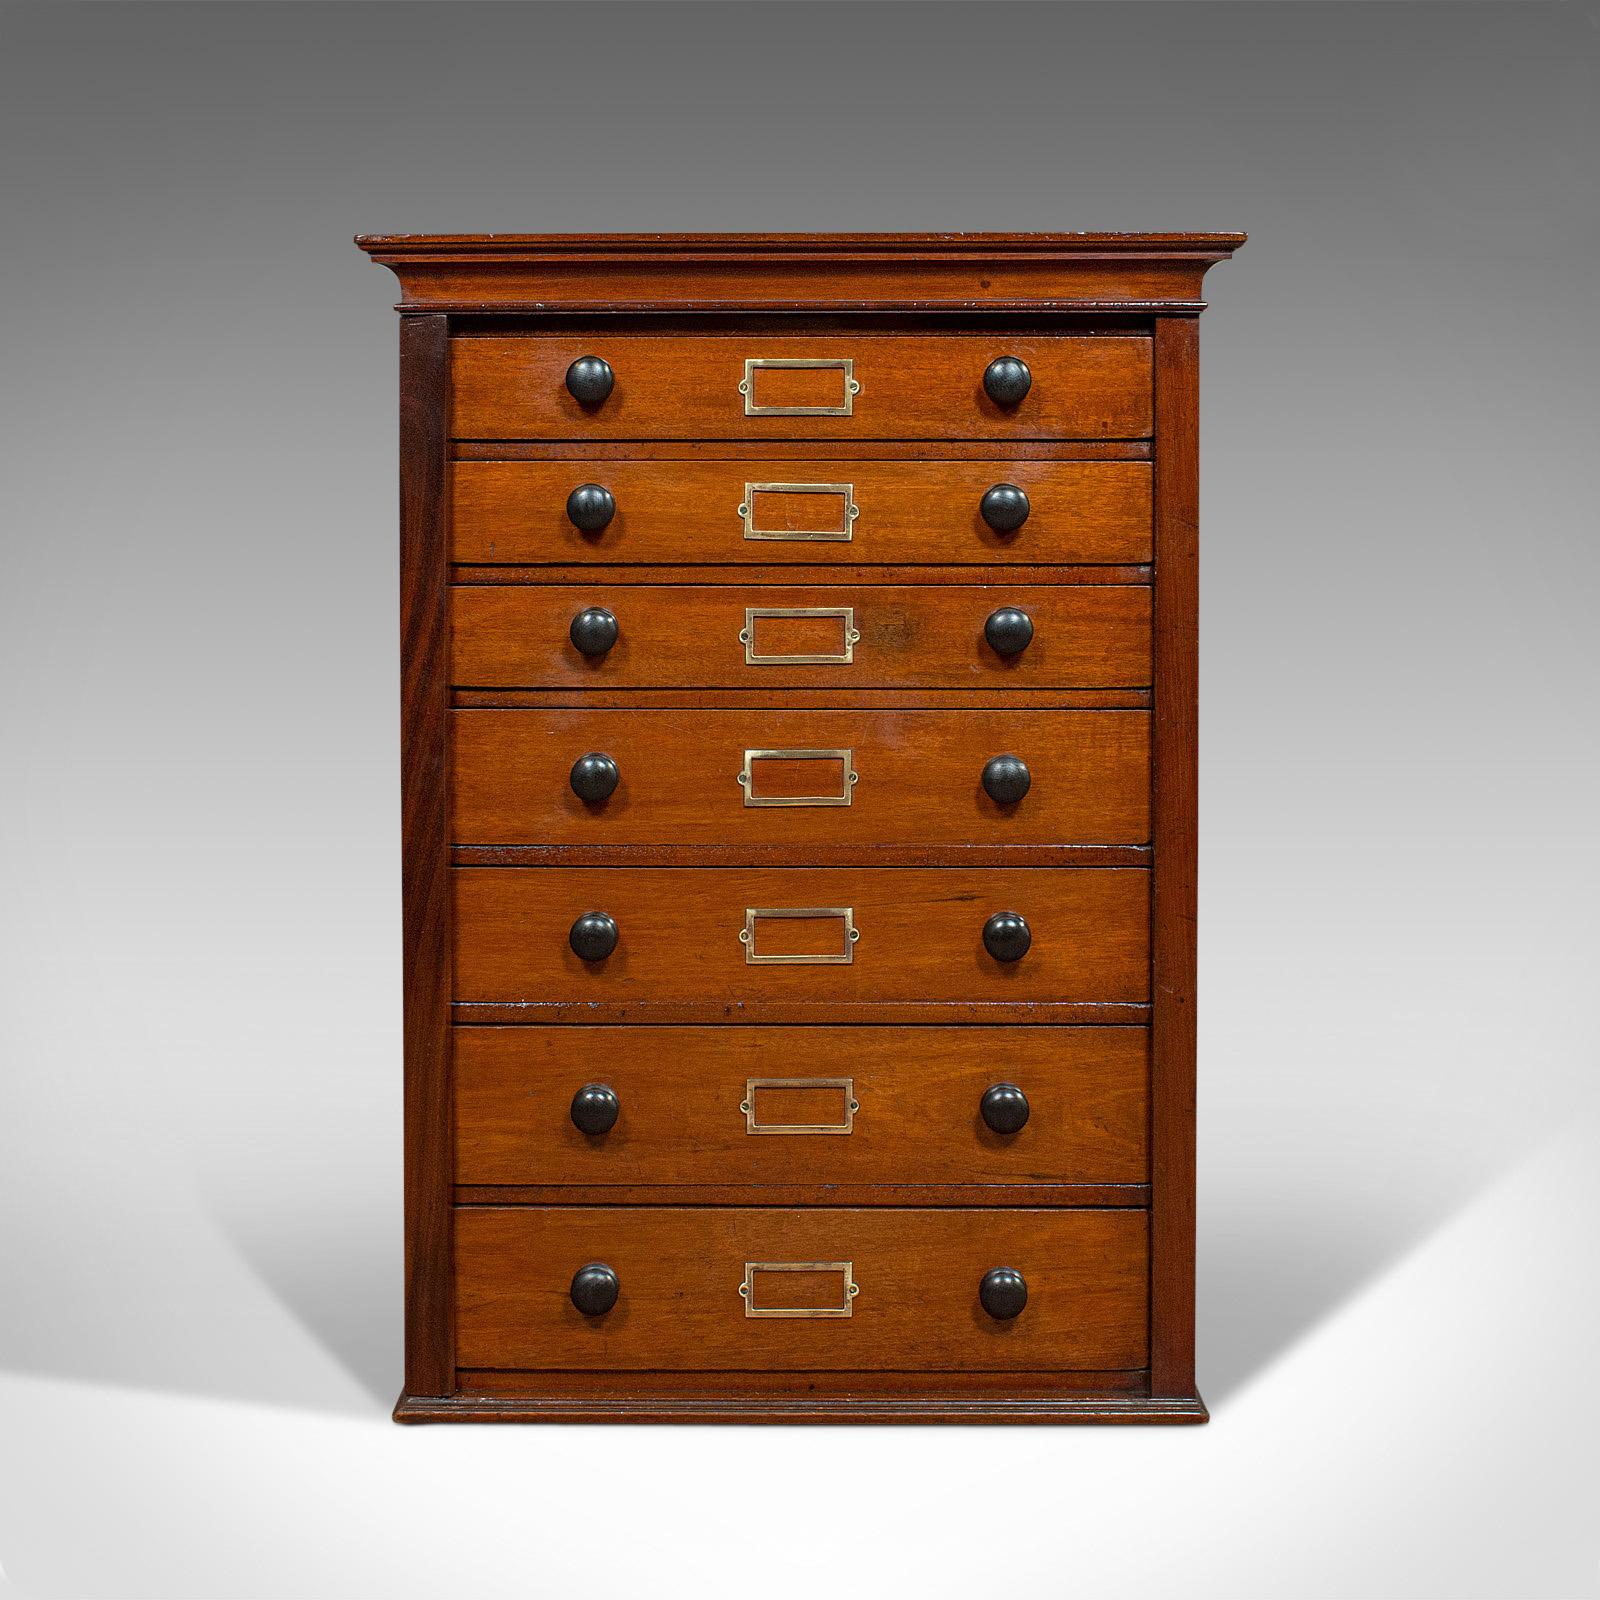 This is an antique specimen cabinet. An English, mahogany and boxwood chest of drawers ideal for shop or retail use, dating to the Edwardian period, circa 1910.

Elegant cabinet from the Edwardian period
Displays a desirable aged patina
Select